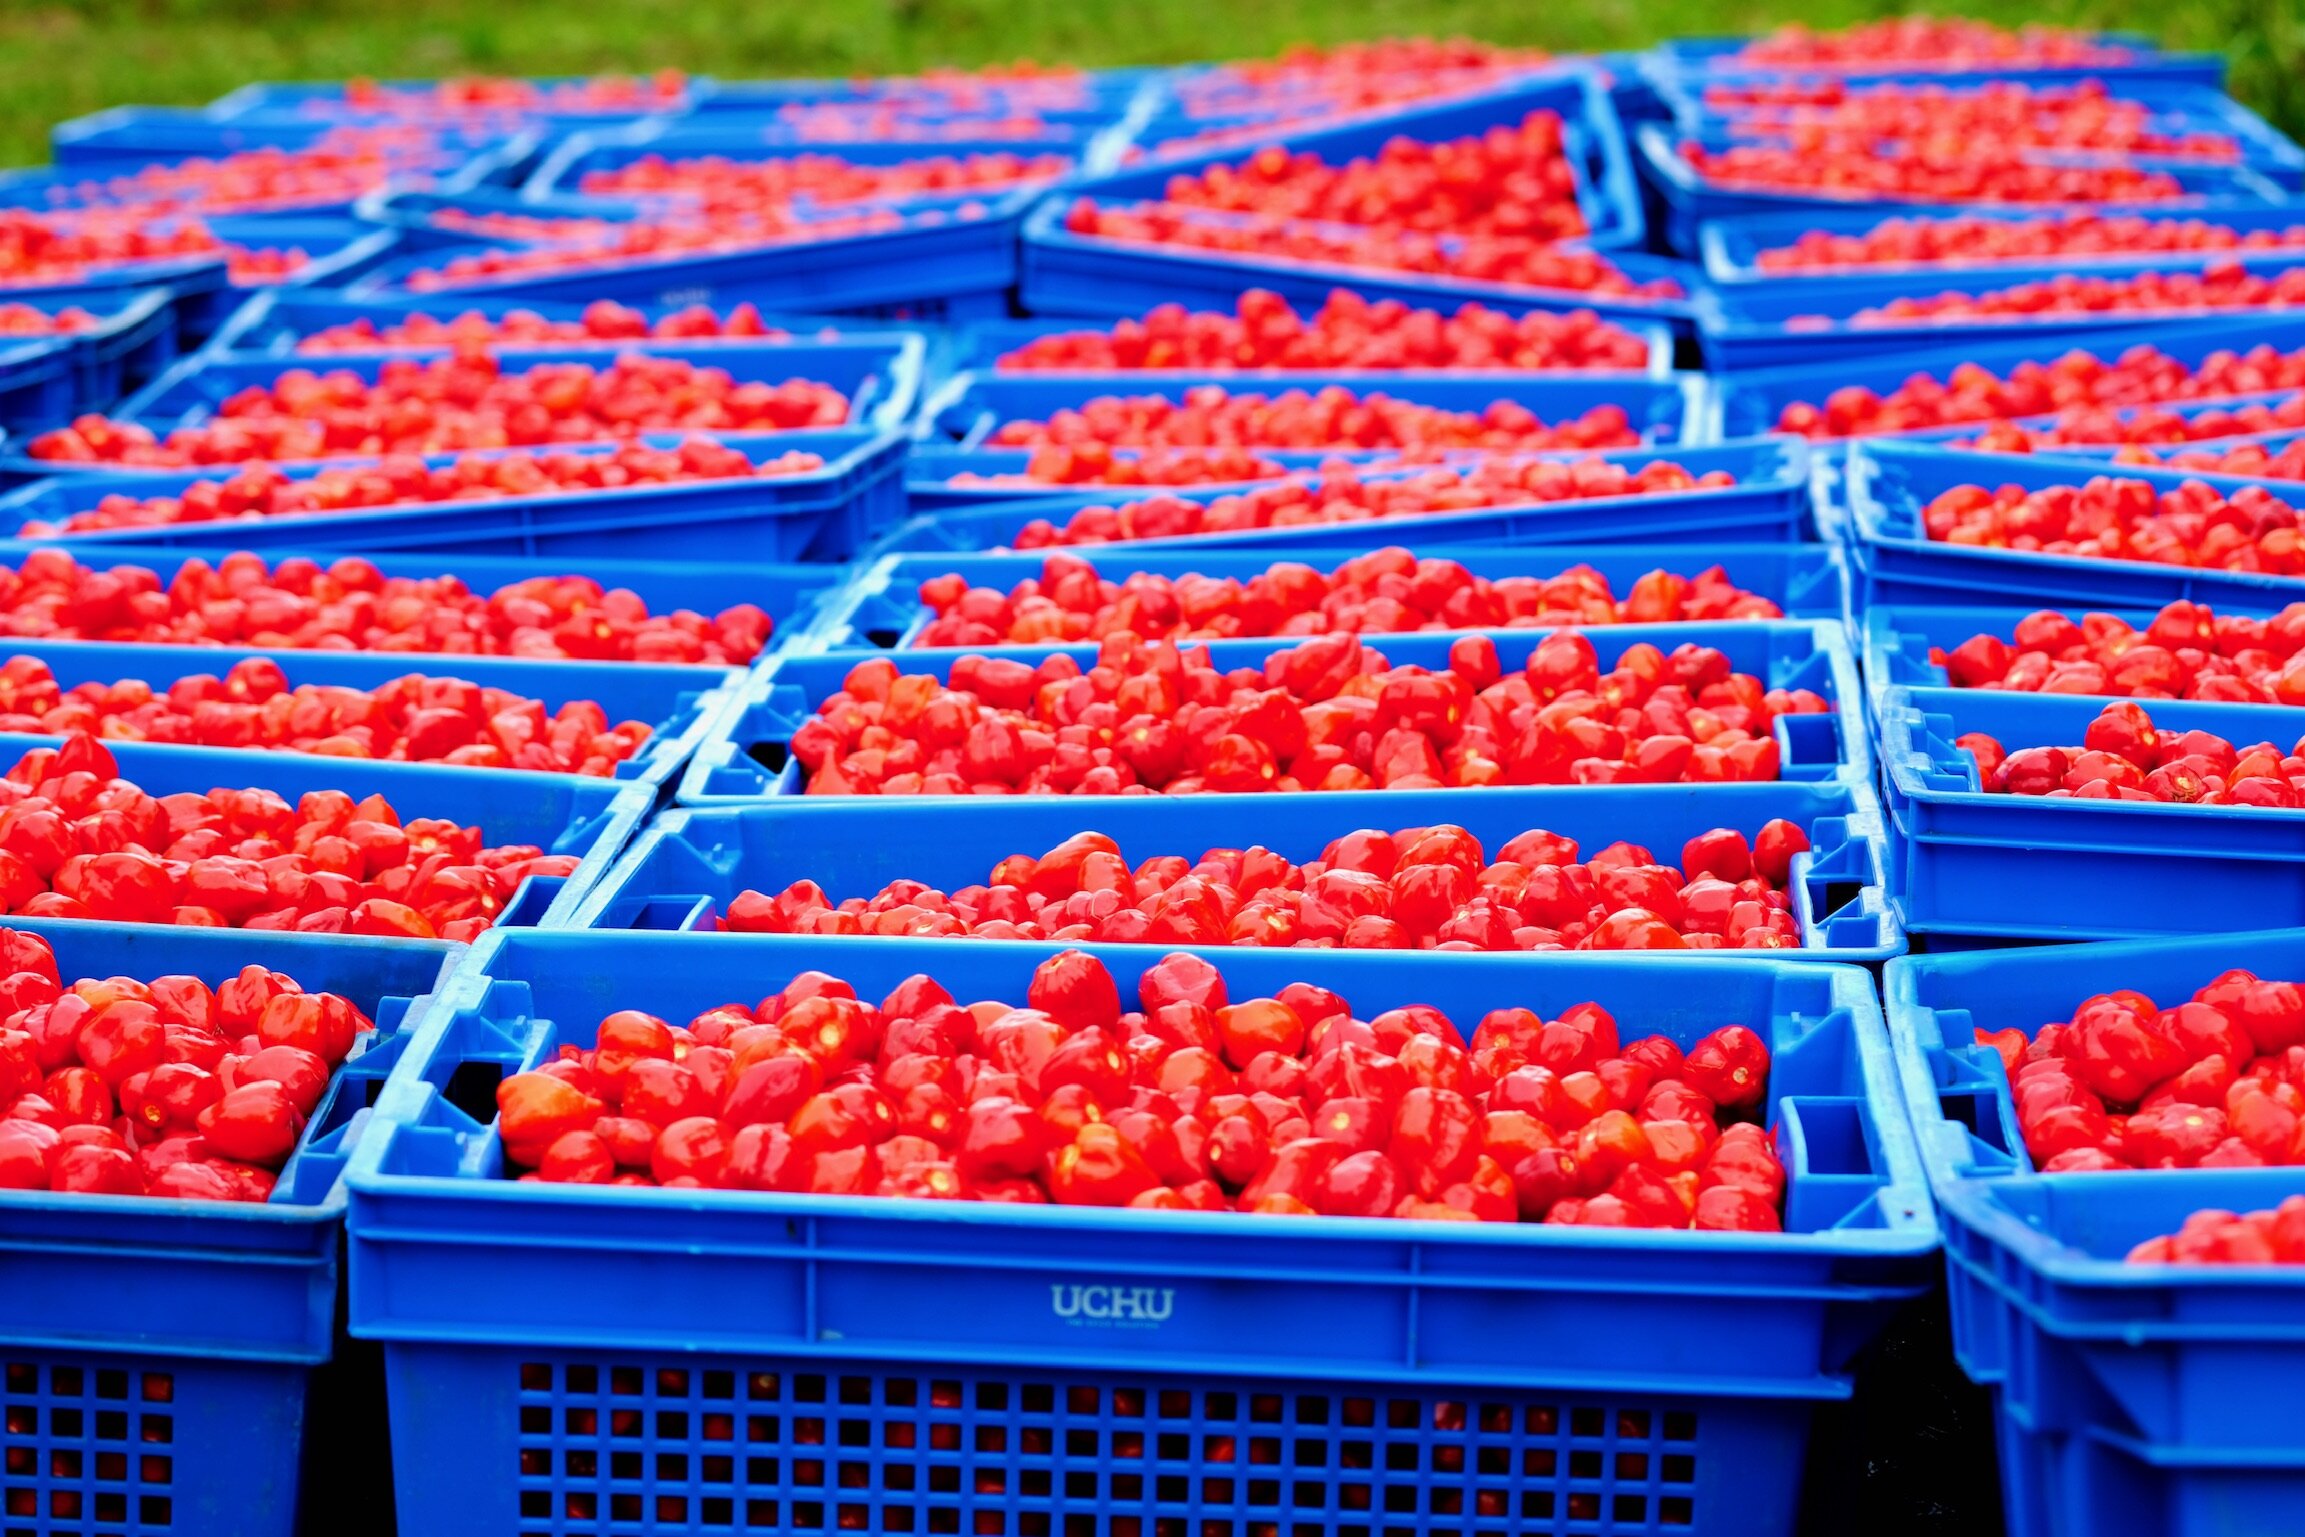 Harvested red Habanero chili peppers in blue crates - UCHU Spice.jpeg